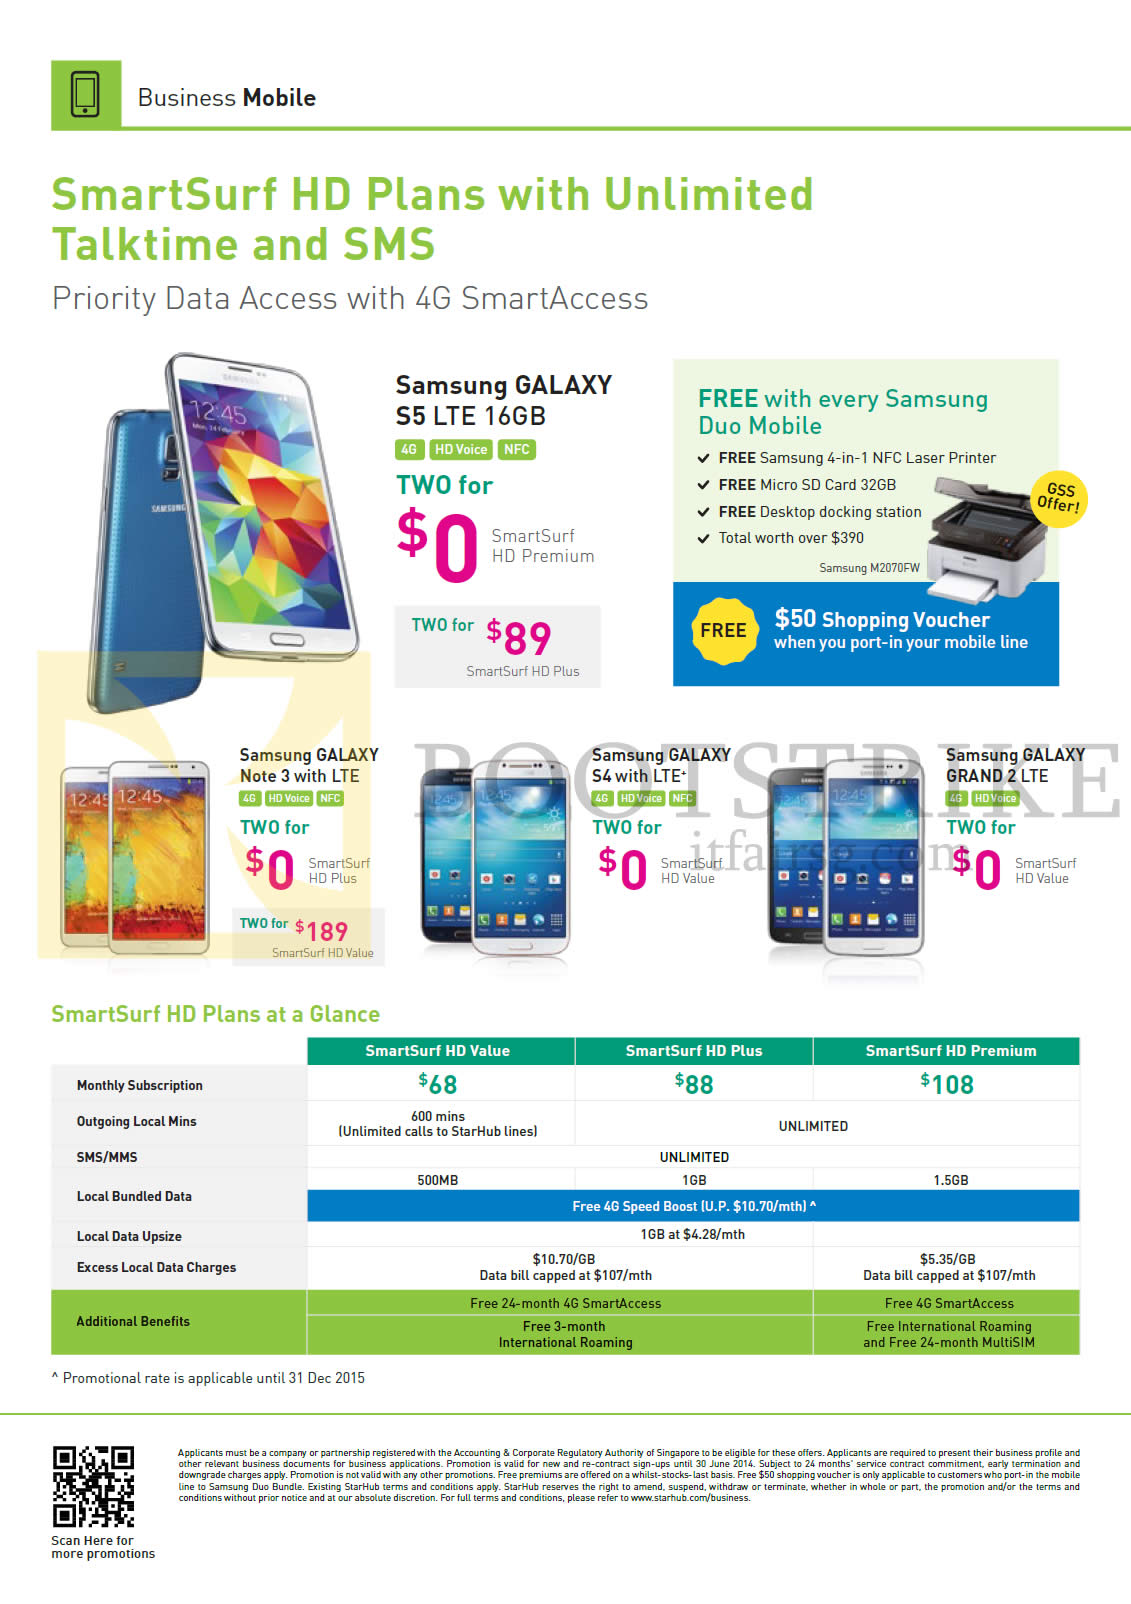 PC SHOW 2014 price list image brochure of Starhub Business Mobile Samsung Galaxy S5, Note 3, S4, Grand 2, SmartSurf HD Plans Value, Plus, Premium